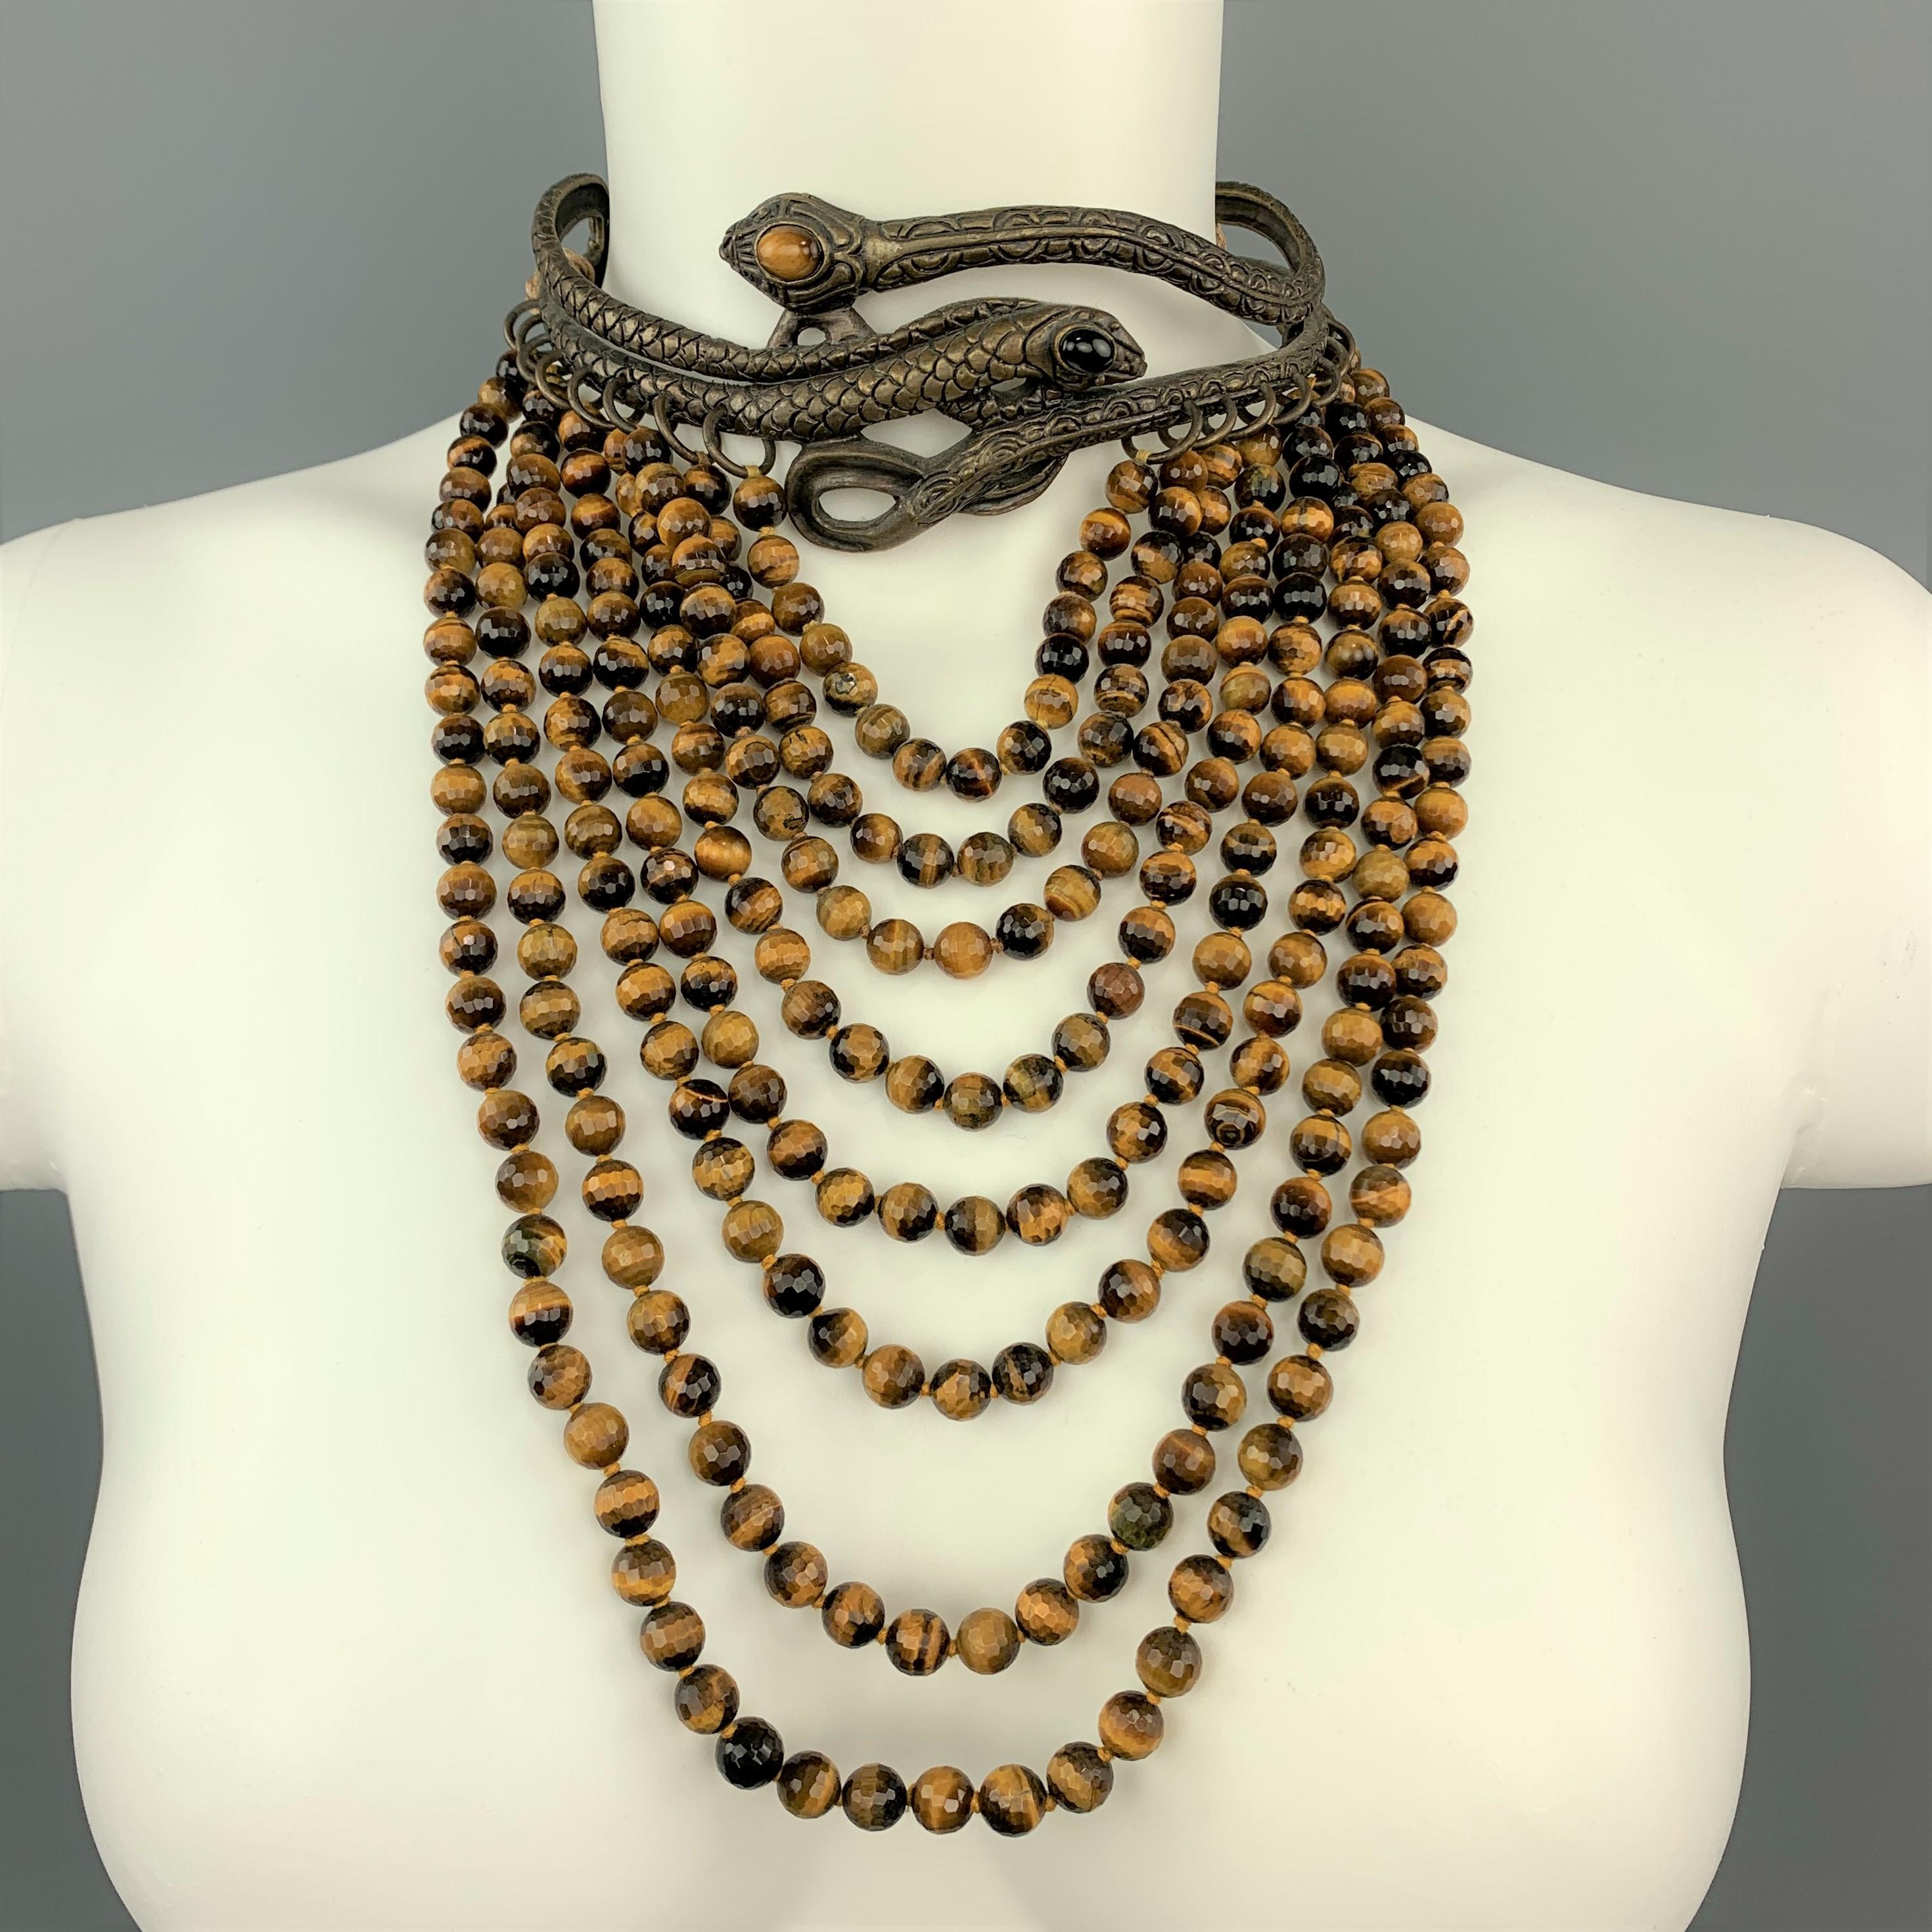 VALENTINO GARVANI Fall Winter 2002 Couture Collection runway necklace features antique dark gold tone metal snakes motif choker with black and amber stone eyes, cascading tiger's eye beaded drop strands, and tassel tie back closures. 

Excellent